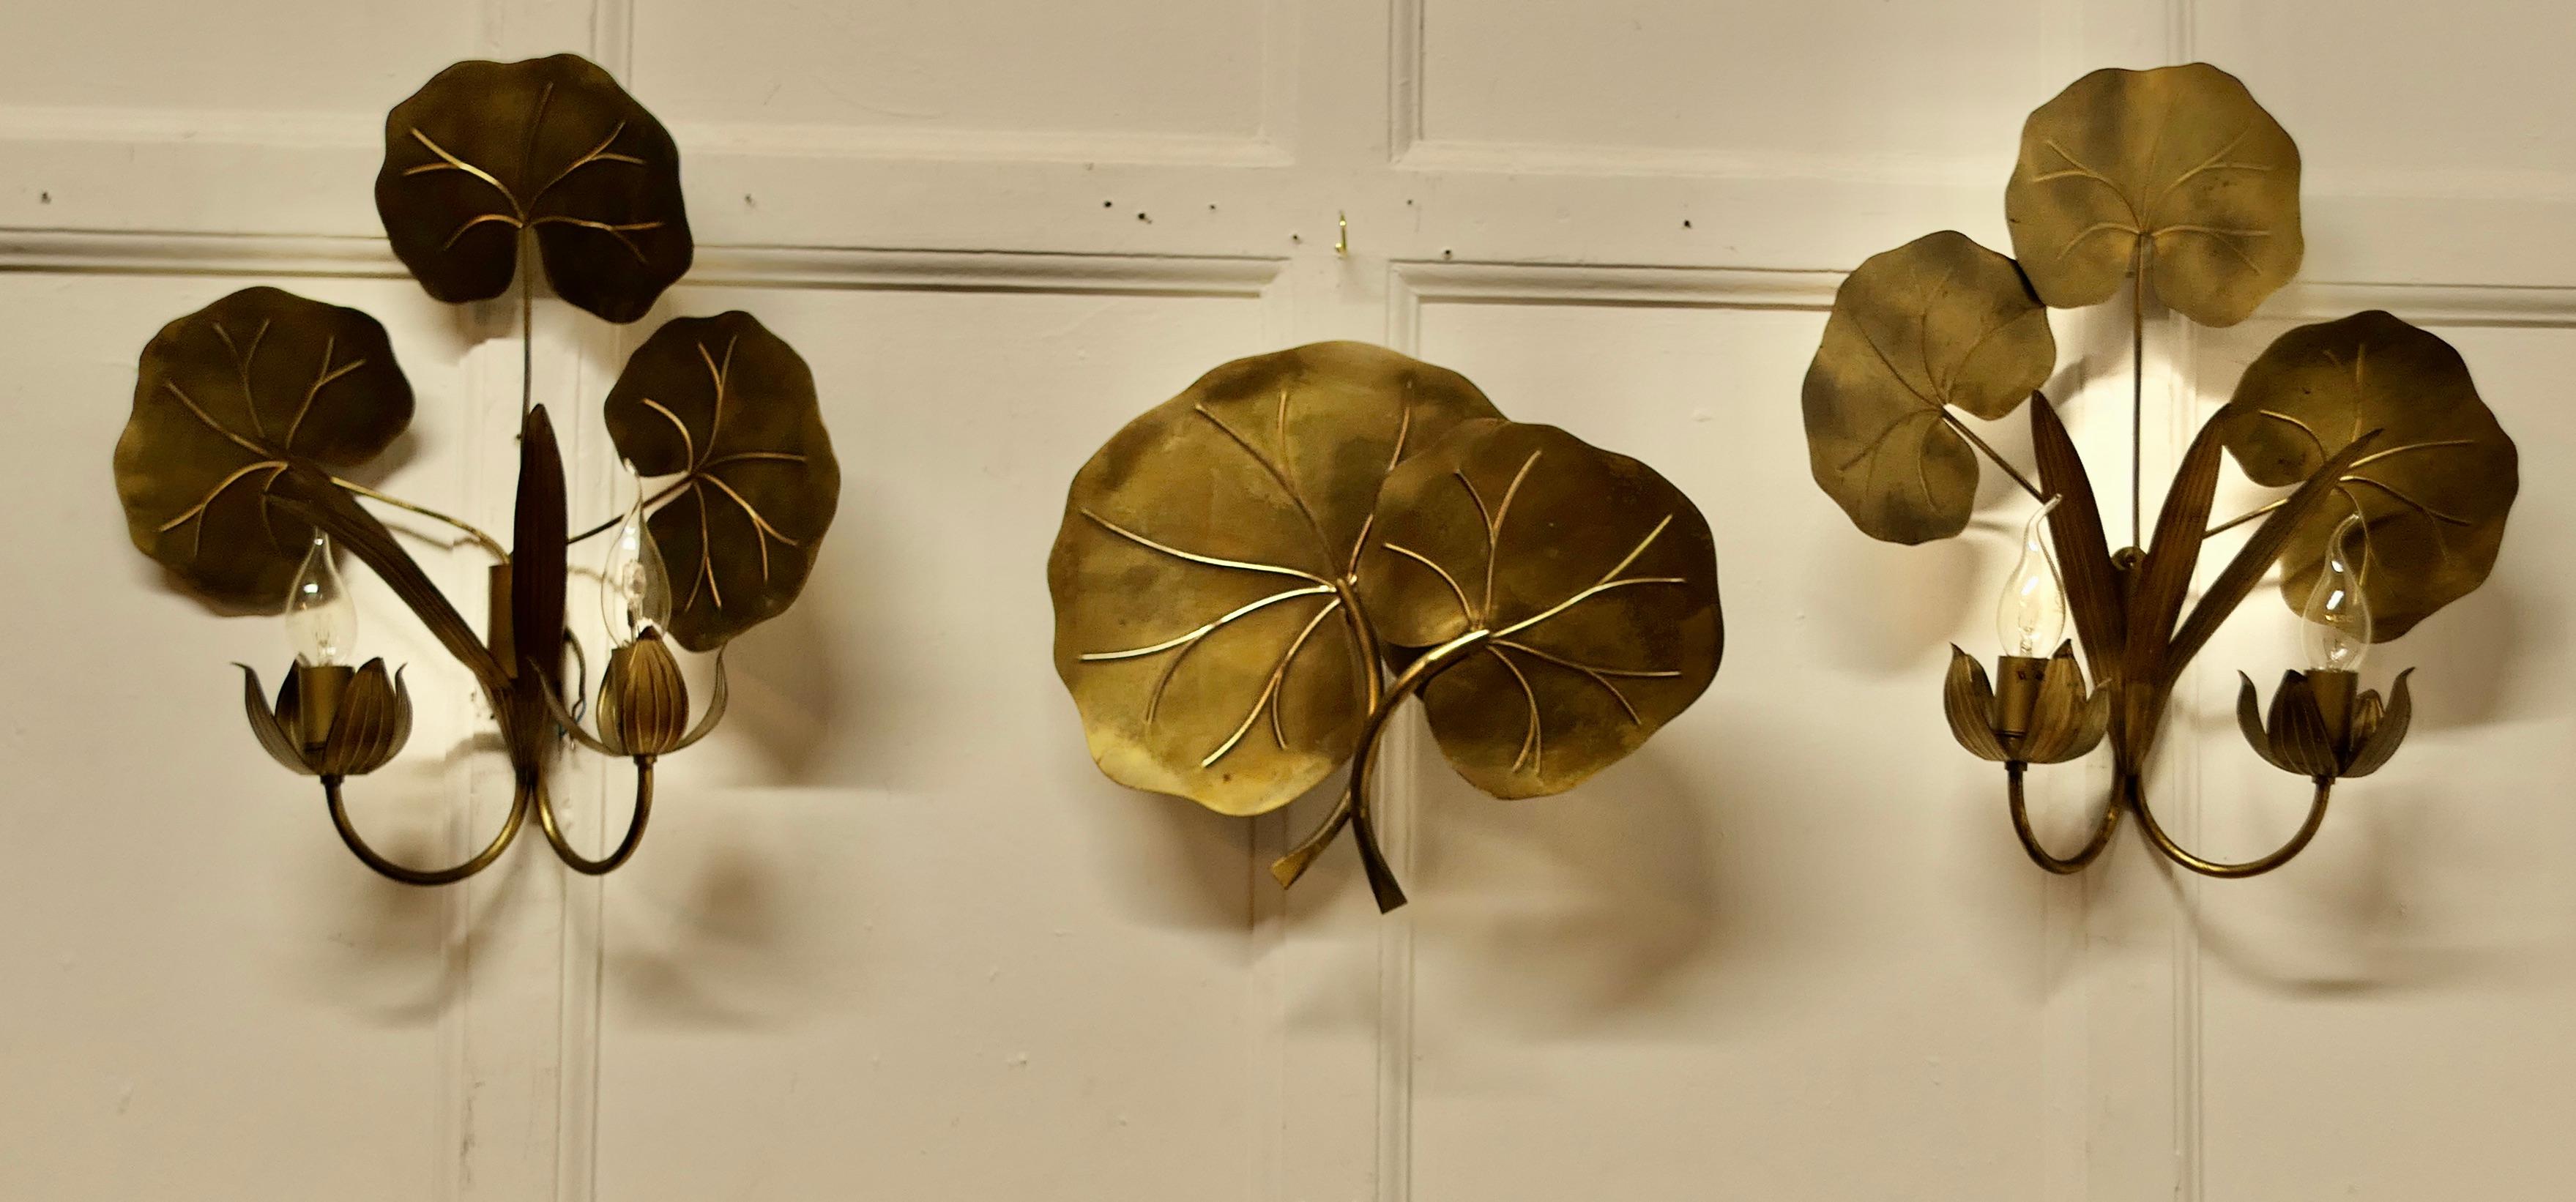 A Set of 3 French Gilded Brass Wall Lights

These are a very pretty set of wall lights, they are in the form of water Lilly leaves
The lights are all working and will need to be installed by an electrician
The largest light is 17” high, 15” across